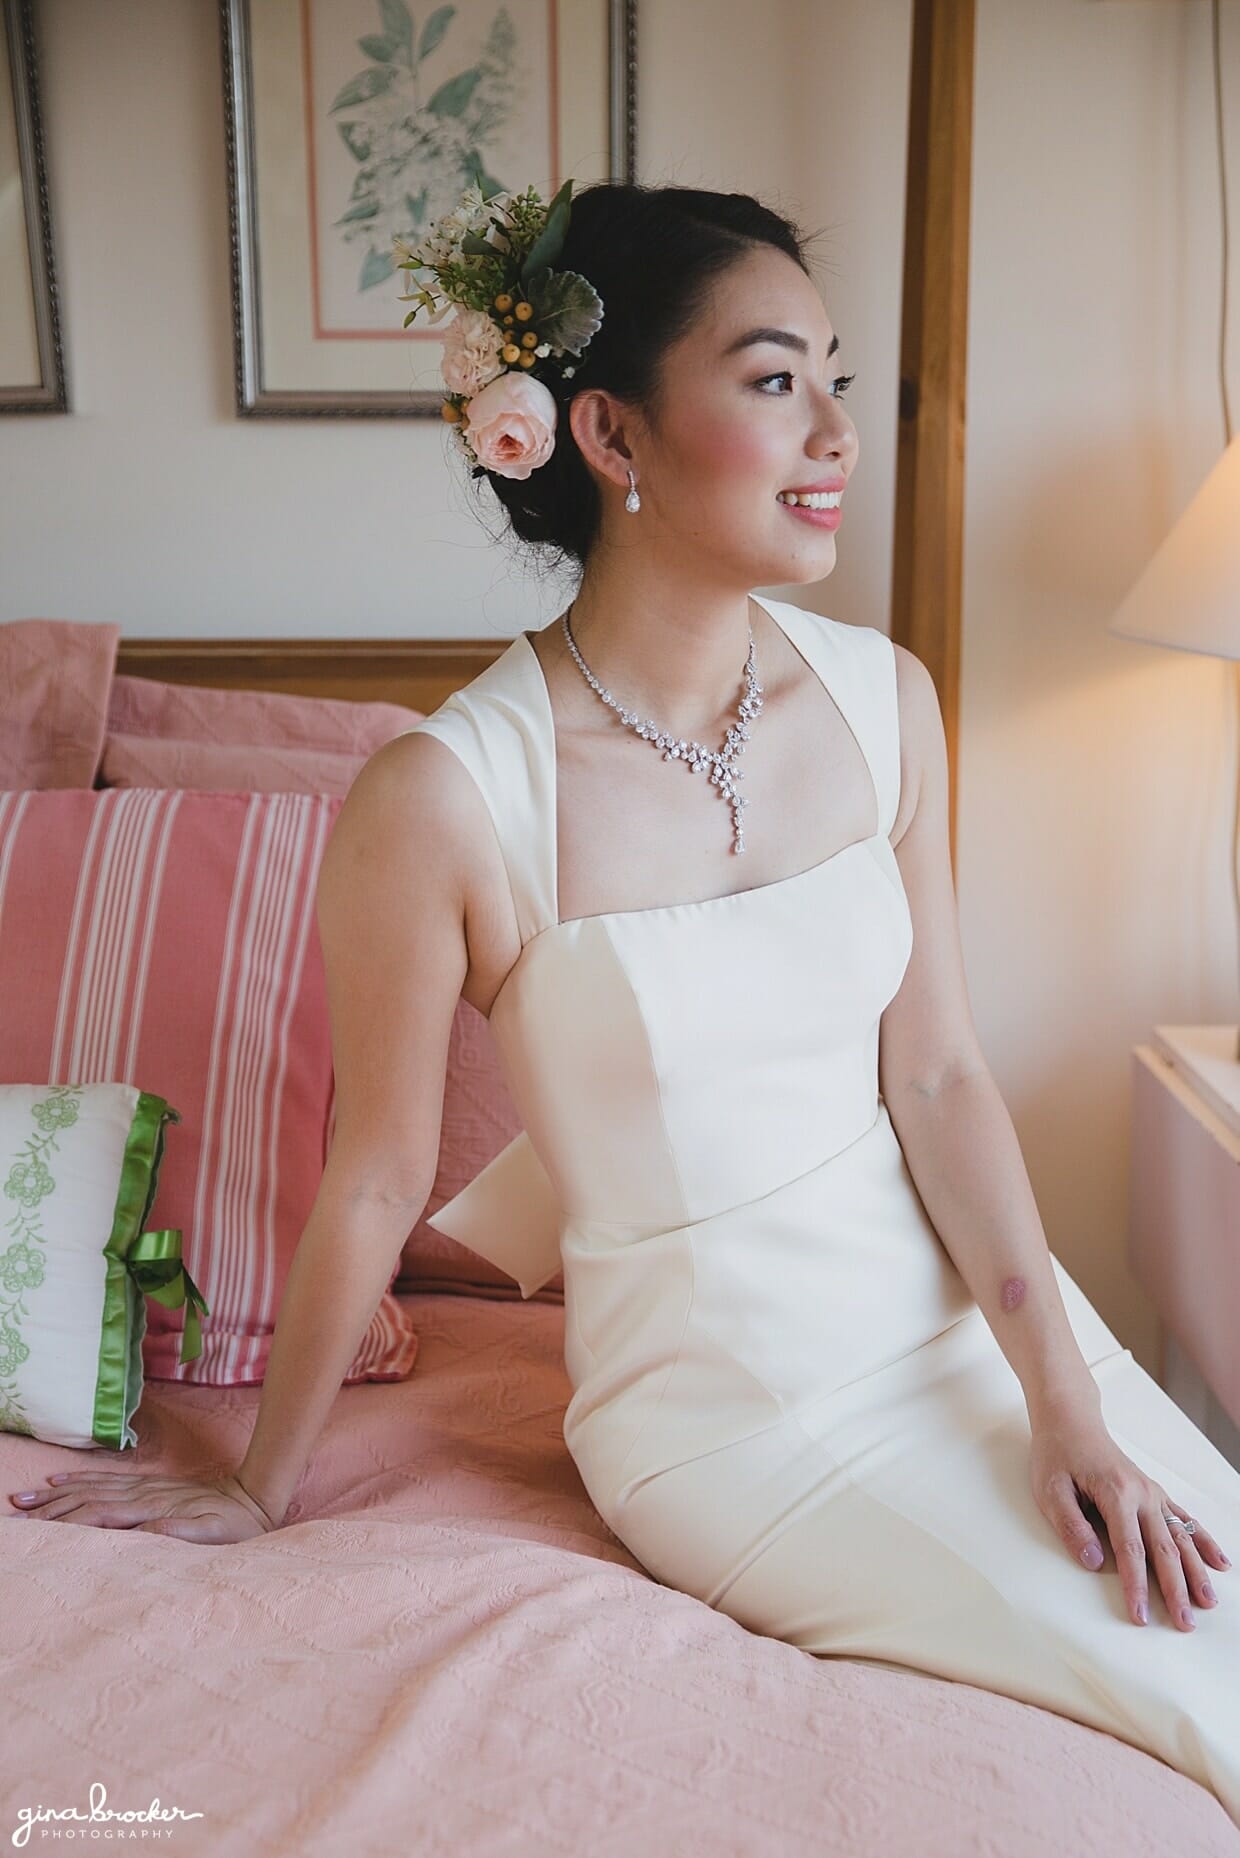 A portrait of a bride wearing an Amsale dress and floral hairpiece on the morning of her wedding in gloucester, massachusetts